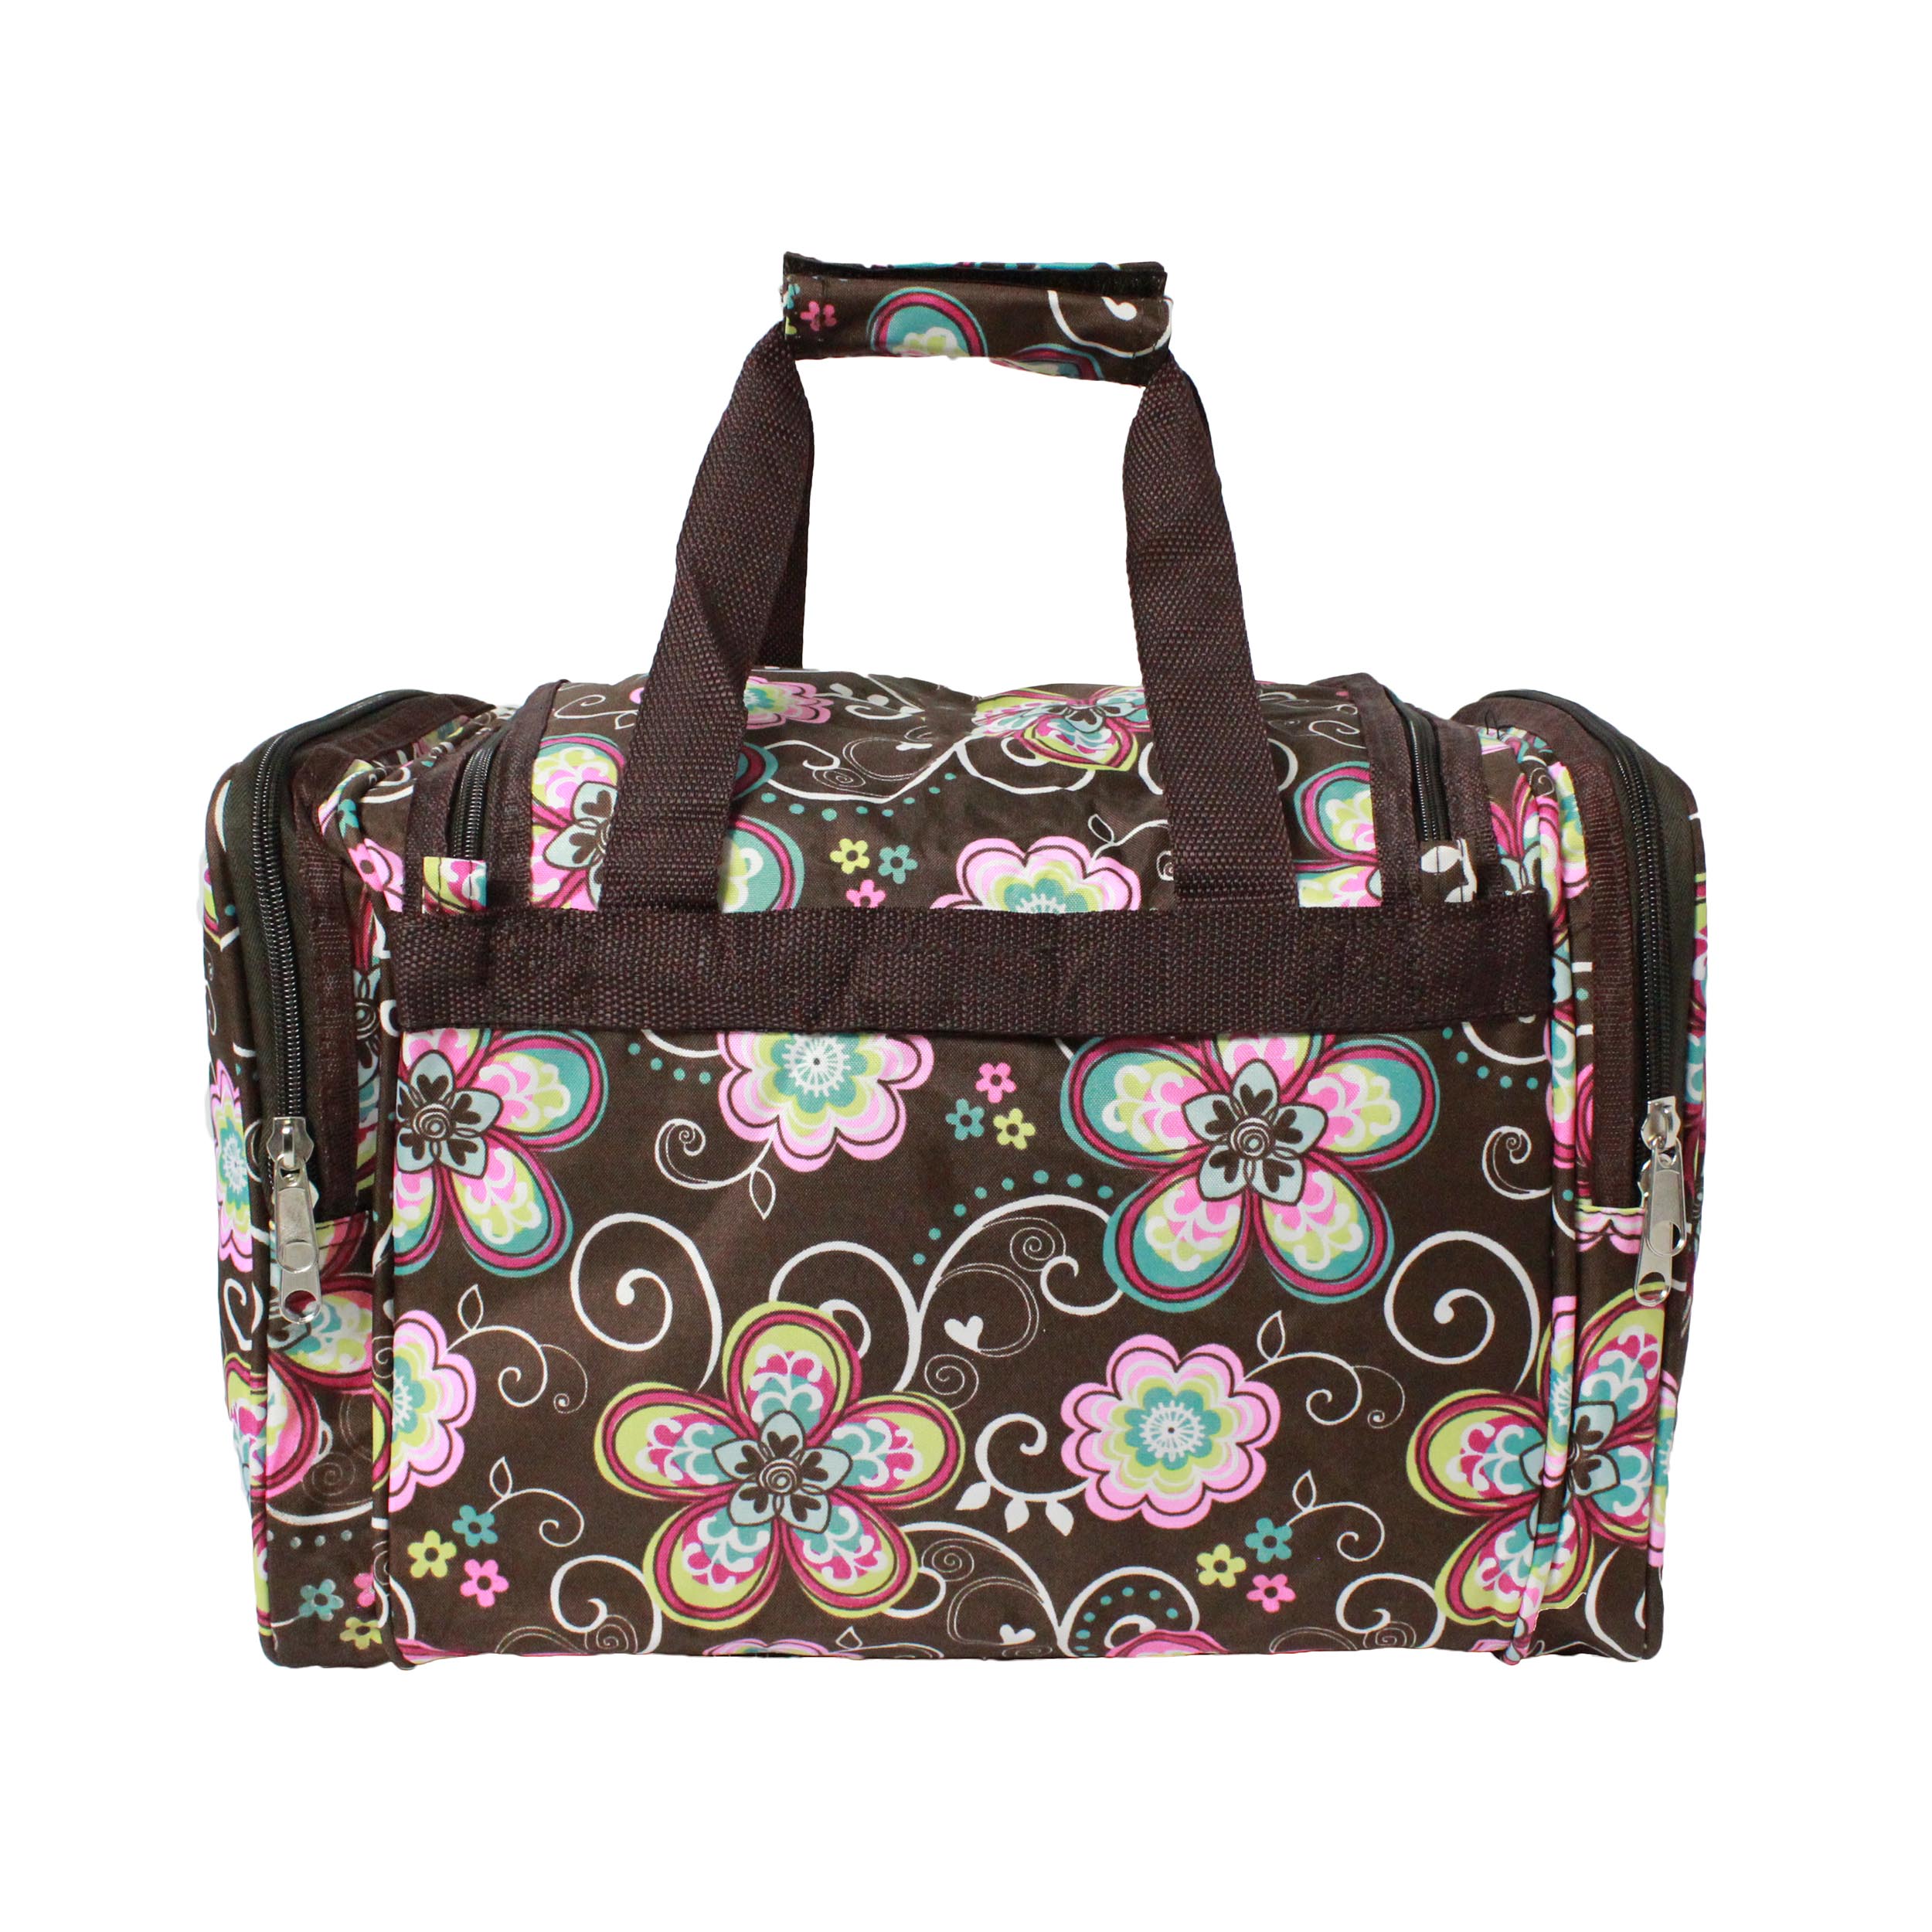 World Traveler 19-inch Carry-On Shoulder Duffel Bag - Brown Daisy - image 2 of 2